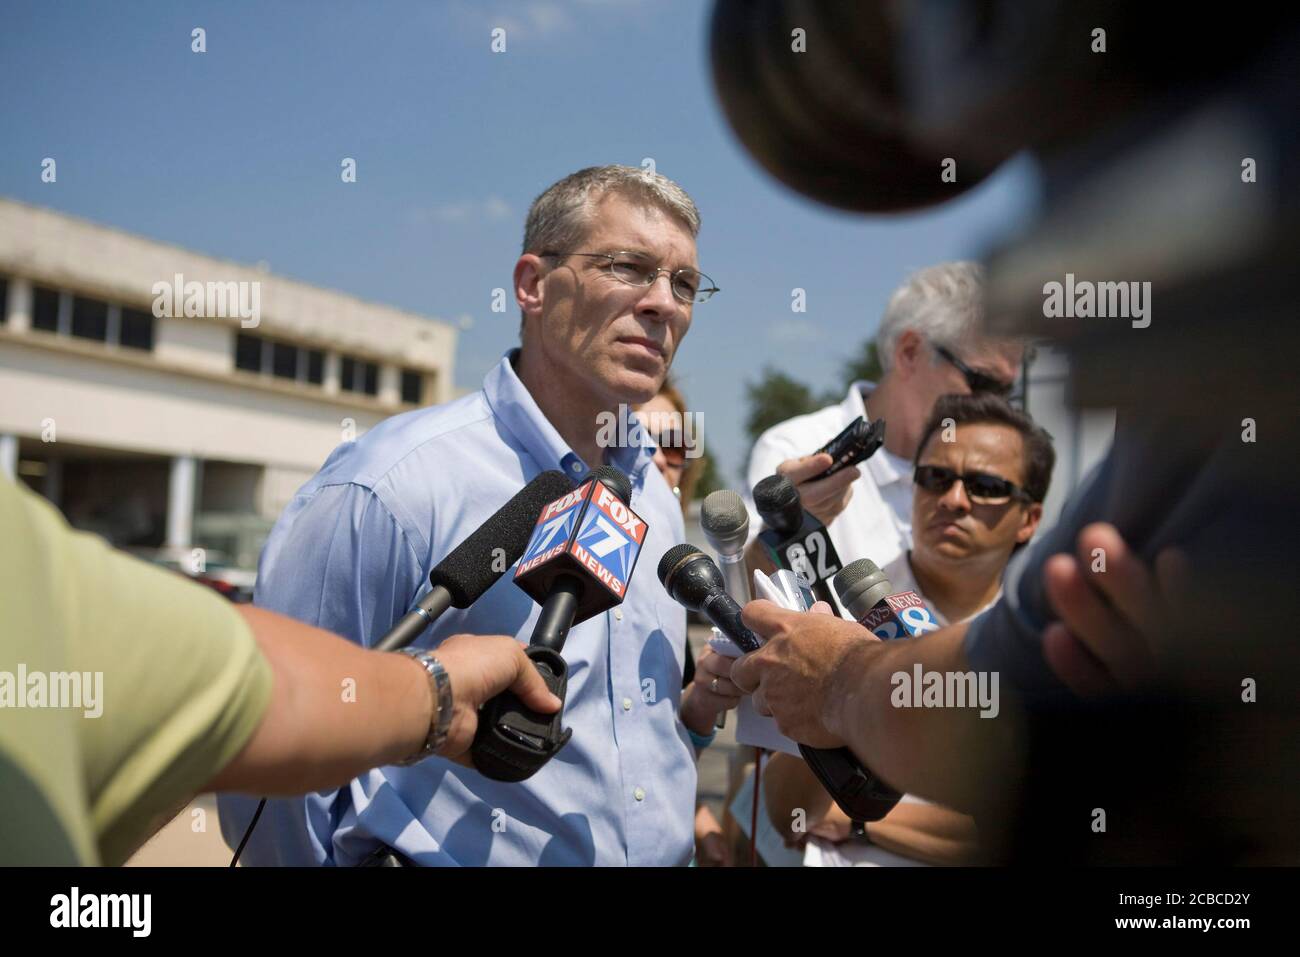 Austin, Texas USA, August 31, 2008: Texas Homeland Security director Steve McCraw briefs reporters during a visit by President Bush to headquarters.  ©Bob Daemmrich Stock Photo